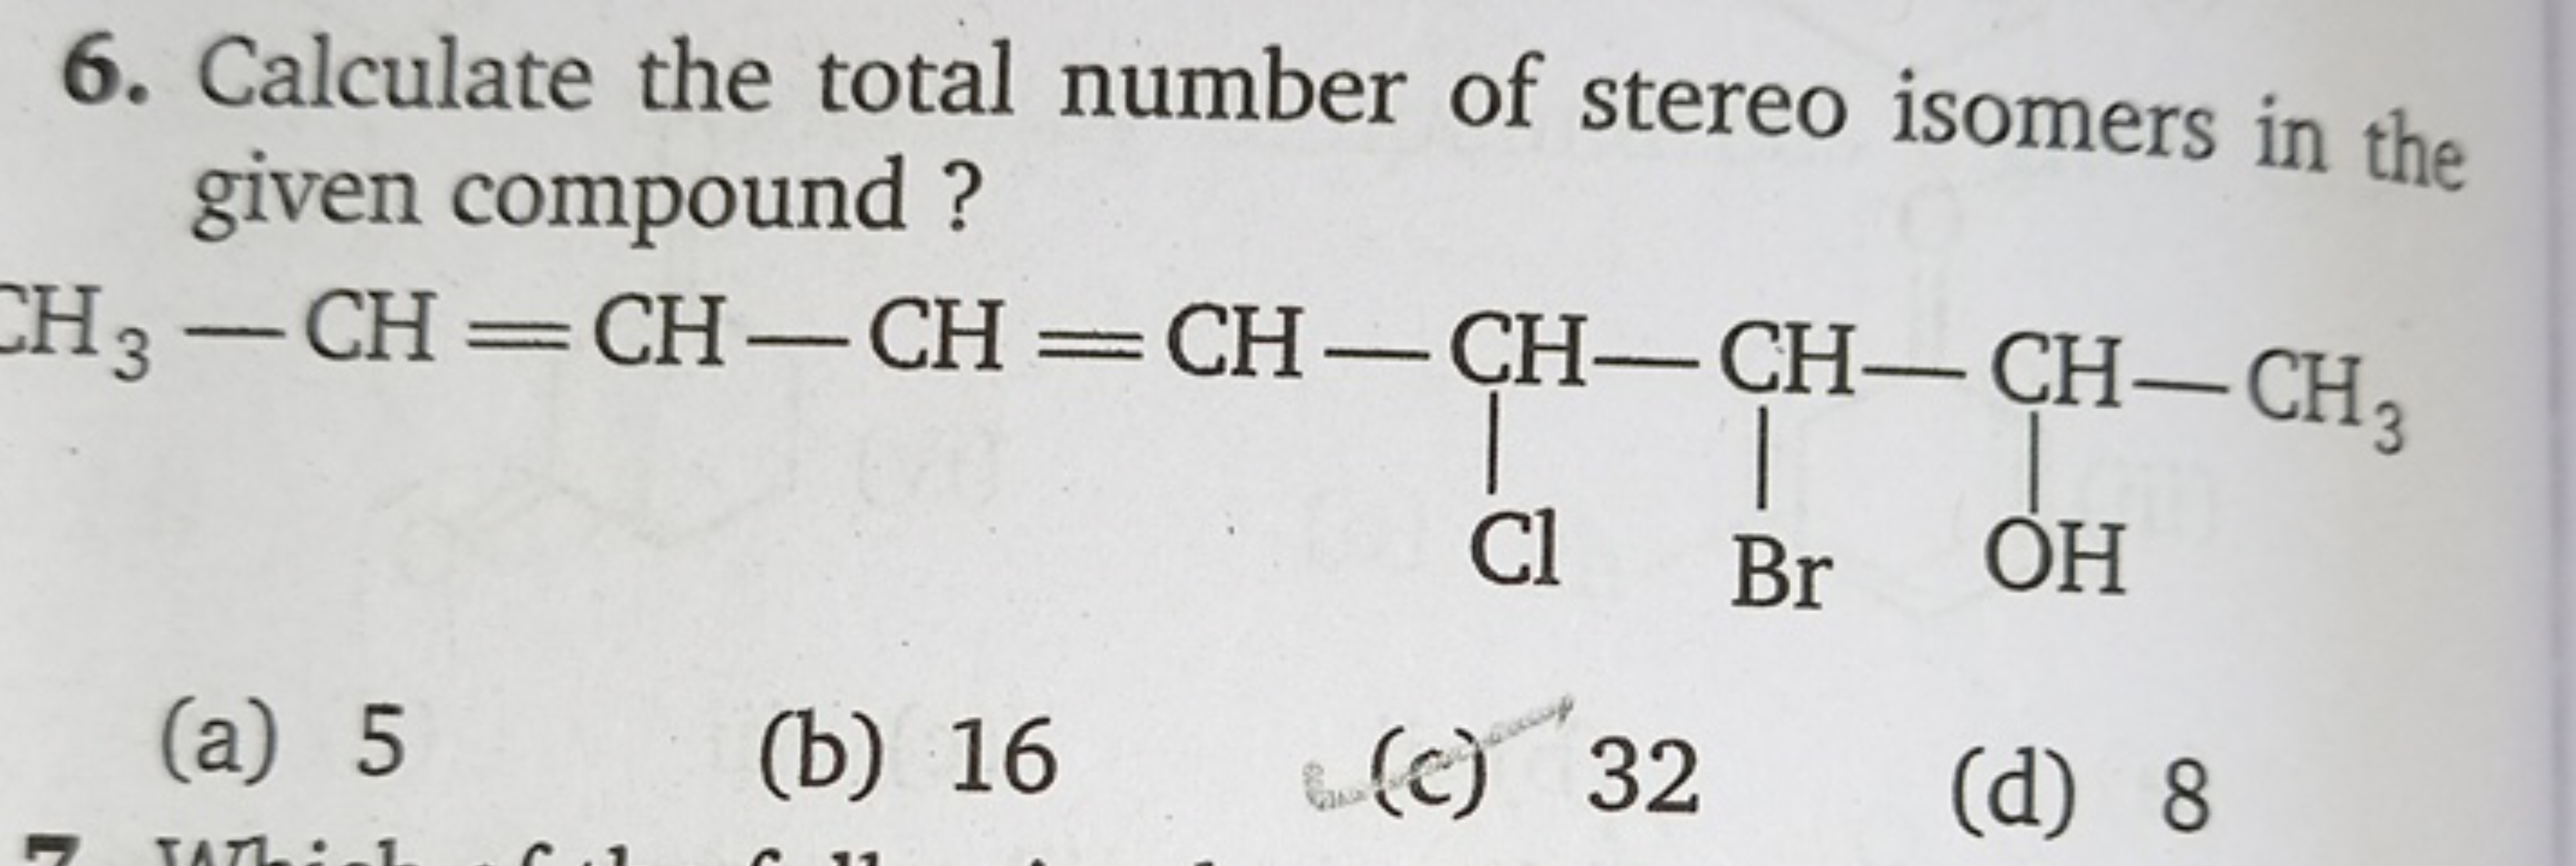 Calculate the total number of stereo isomers in the given compound? CC